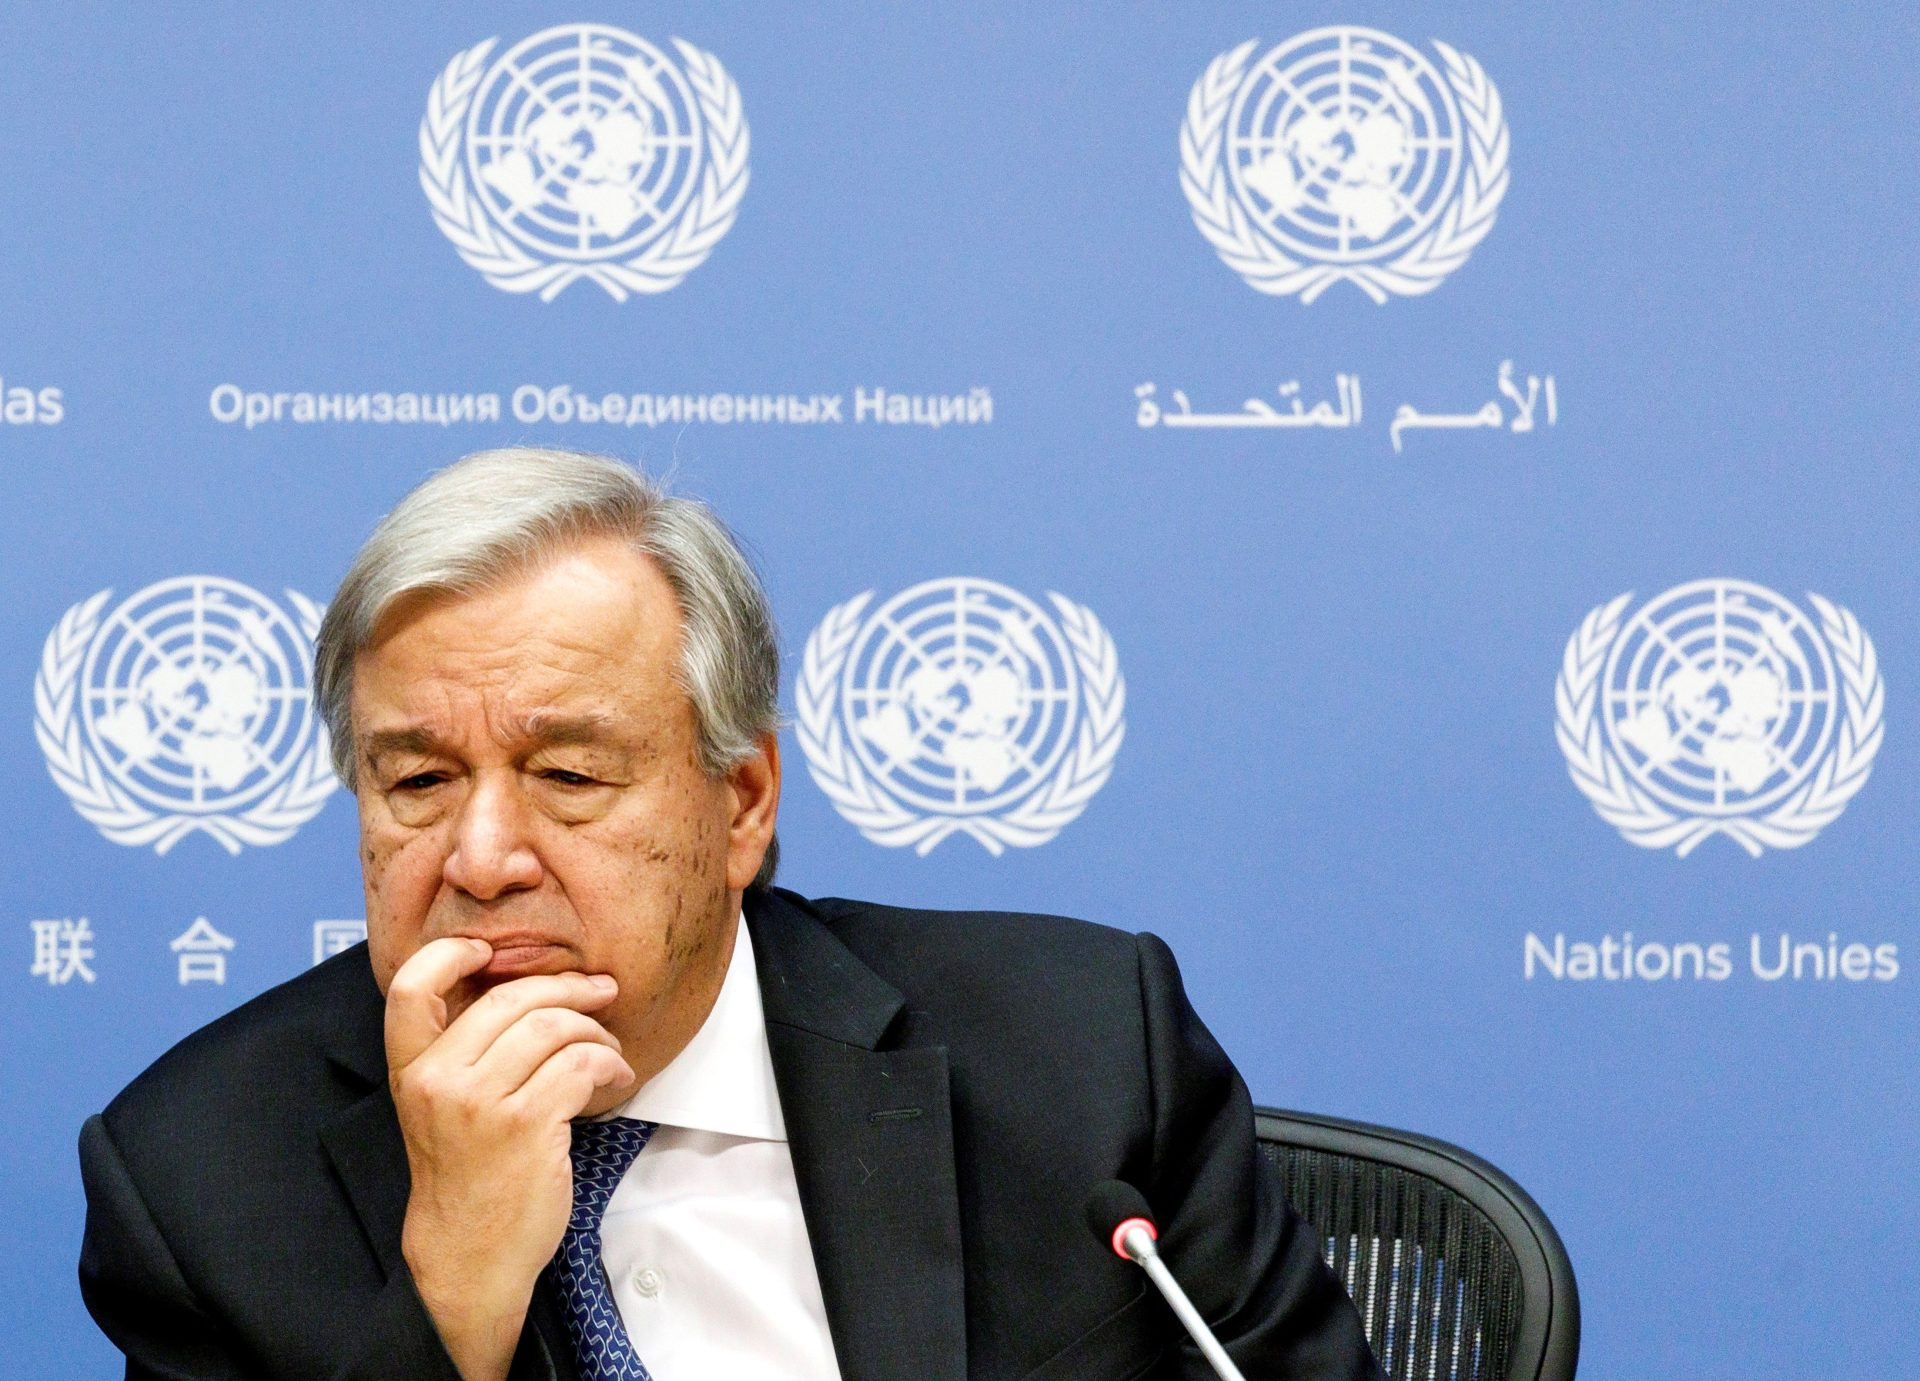 United Nations Secretary-General press conference ahead of UN General Assembly